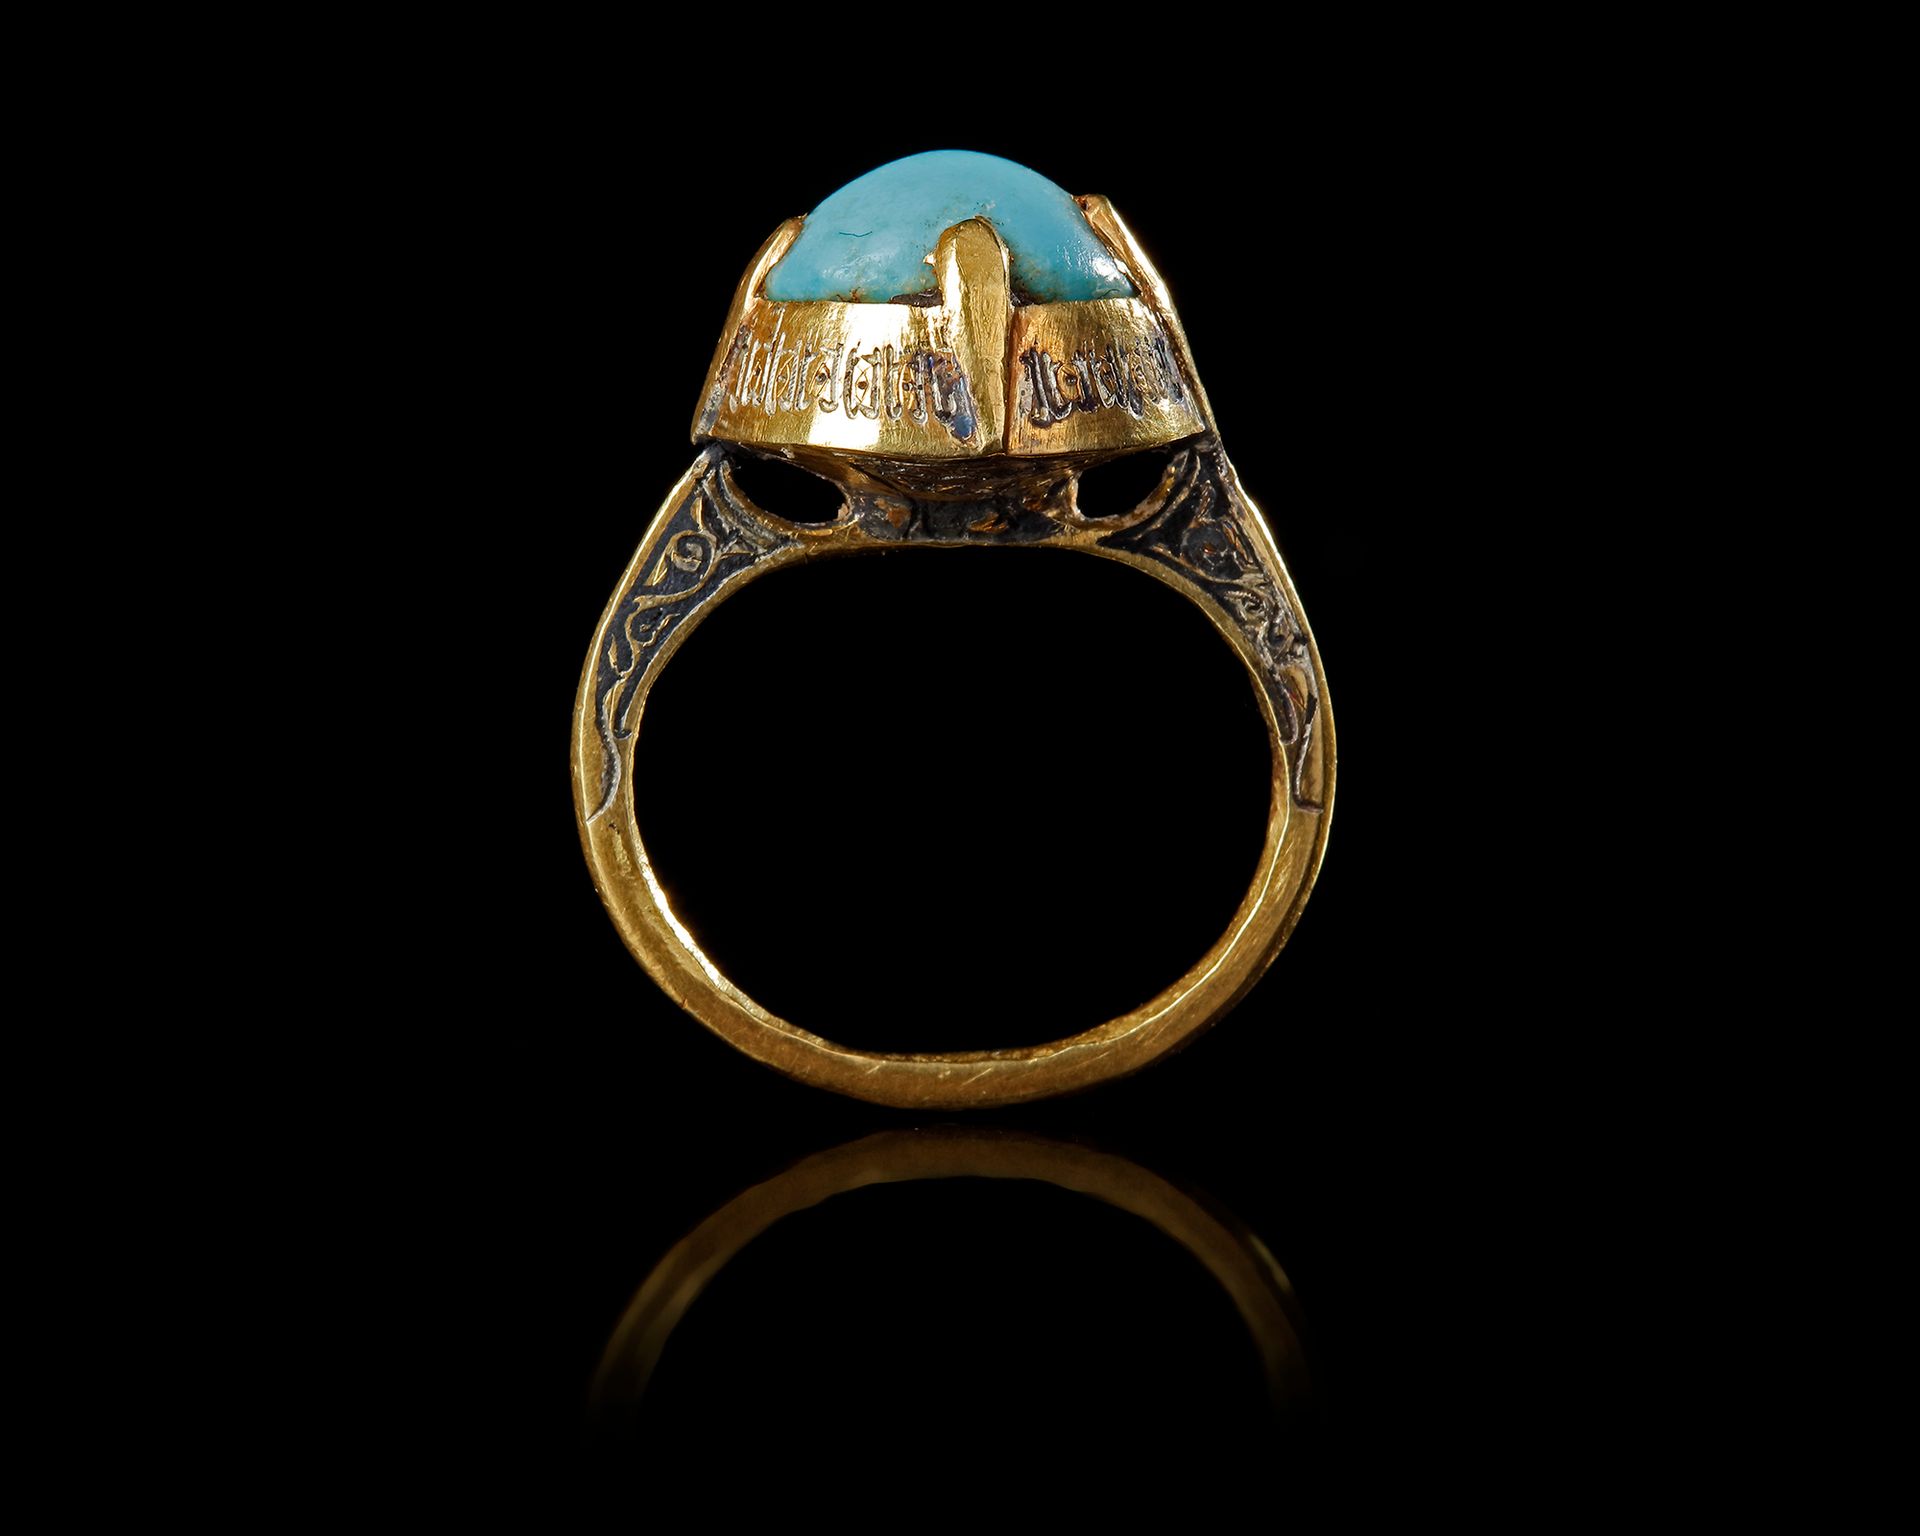 A SELJUK NIELLOED GOLD RING WITH TURQUOISE, PERSIA, 12TH-13TH CENTURY 金质铸造，椭圆形表圈&hellip;